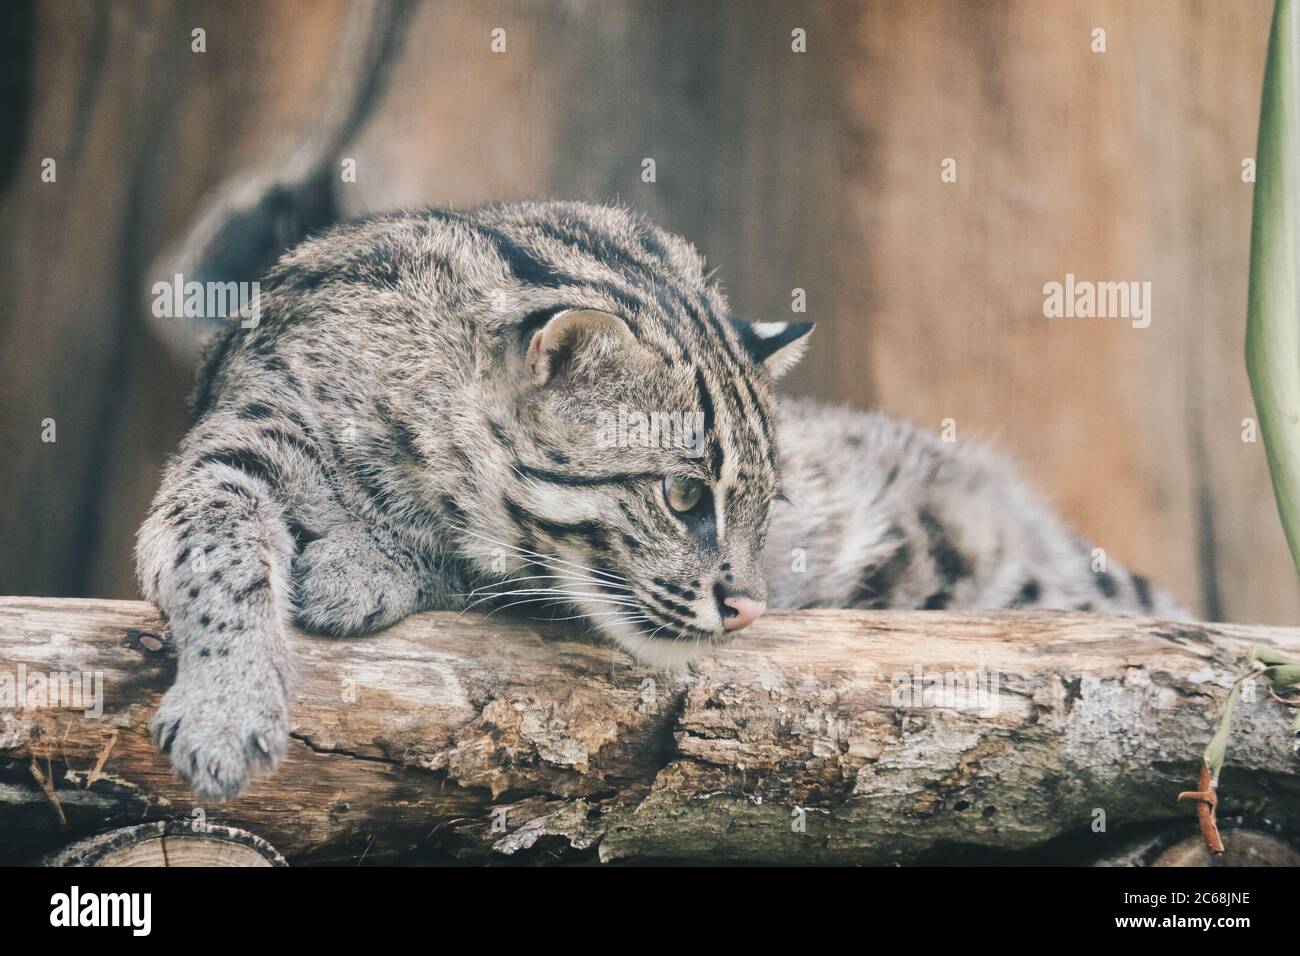 Fishing cat or Mangrove cat (Prionailurus viverrinus) rests on a perch Stock Photo